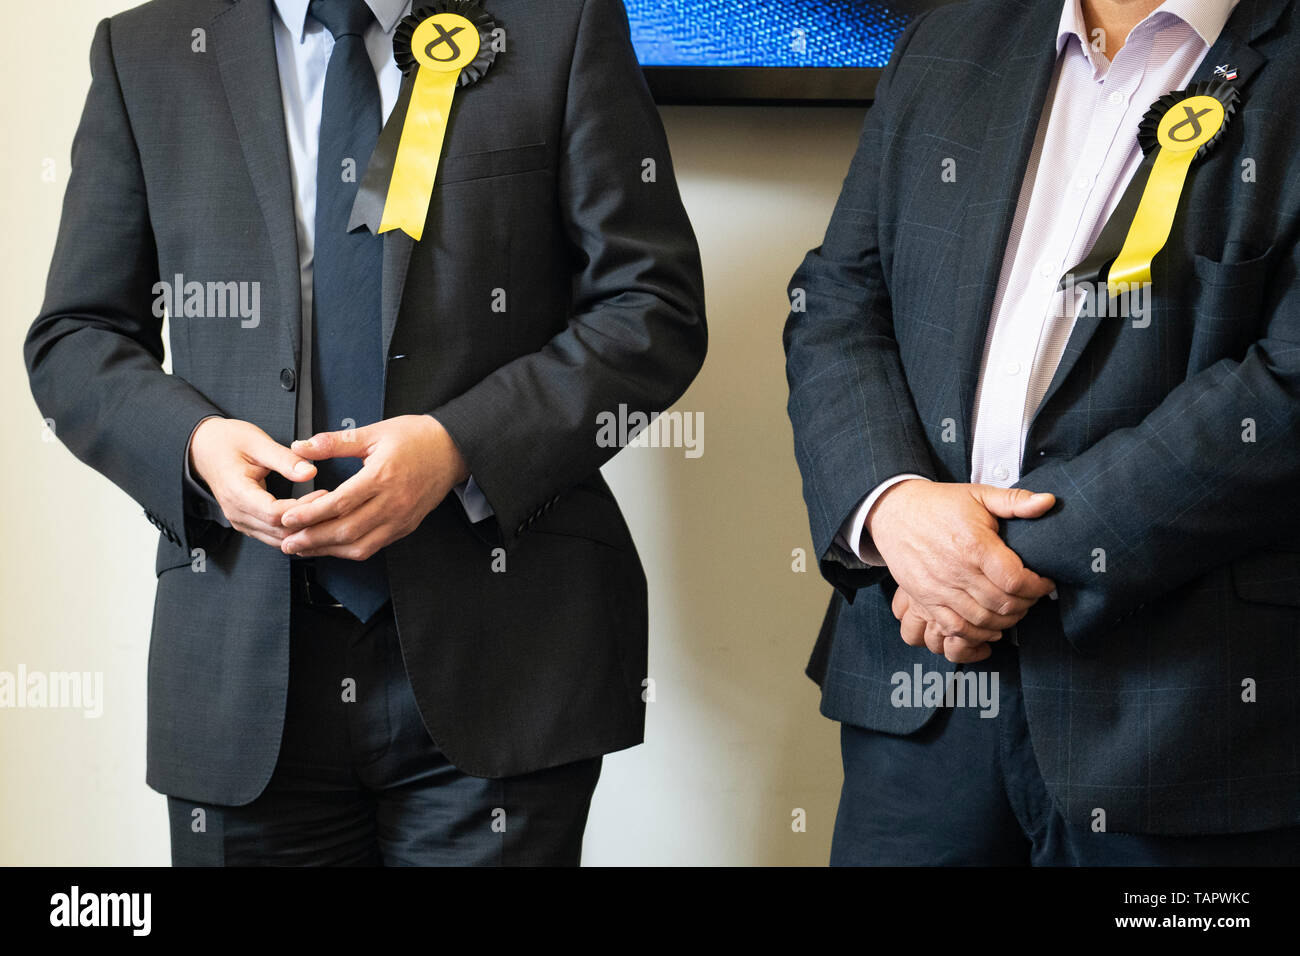 Edinburgh, Scotland, UK. 27th May, 2019. The six new Scottish MEPs are declared at the City Chambers in Edinburgh, Pictured SNP's Alyn Smith, l, Christian Allard Credit: Iain Masterton/Alamy Live News Stock Photo